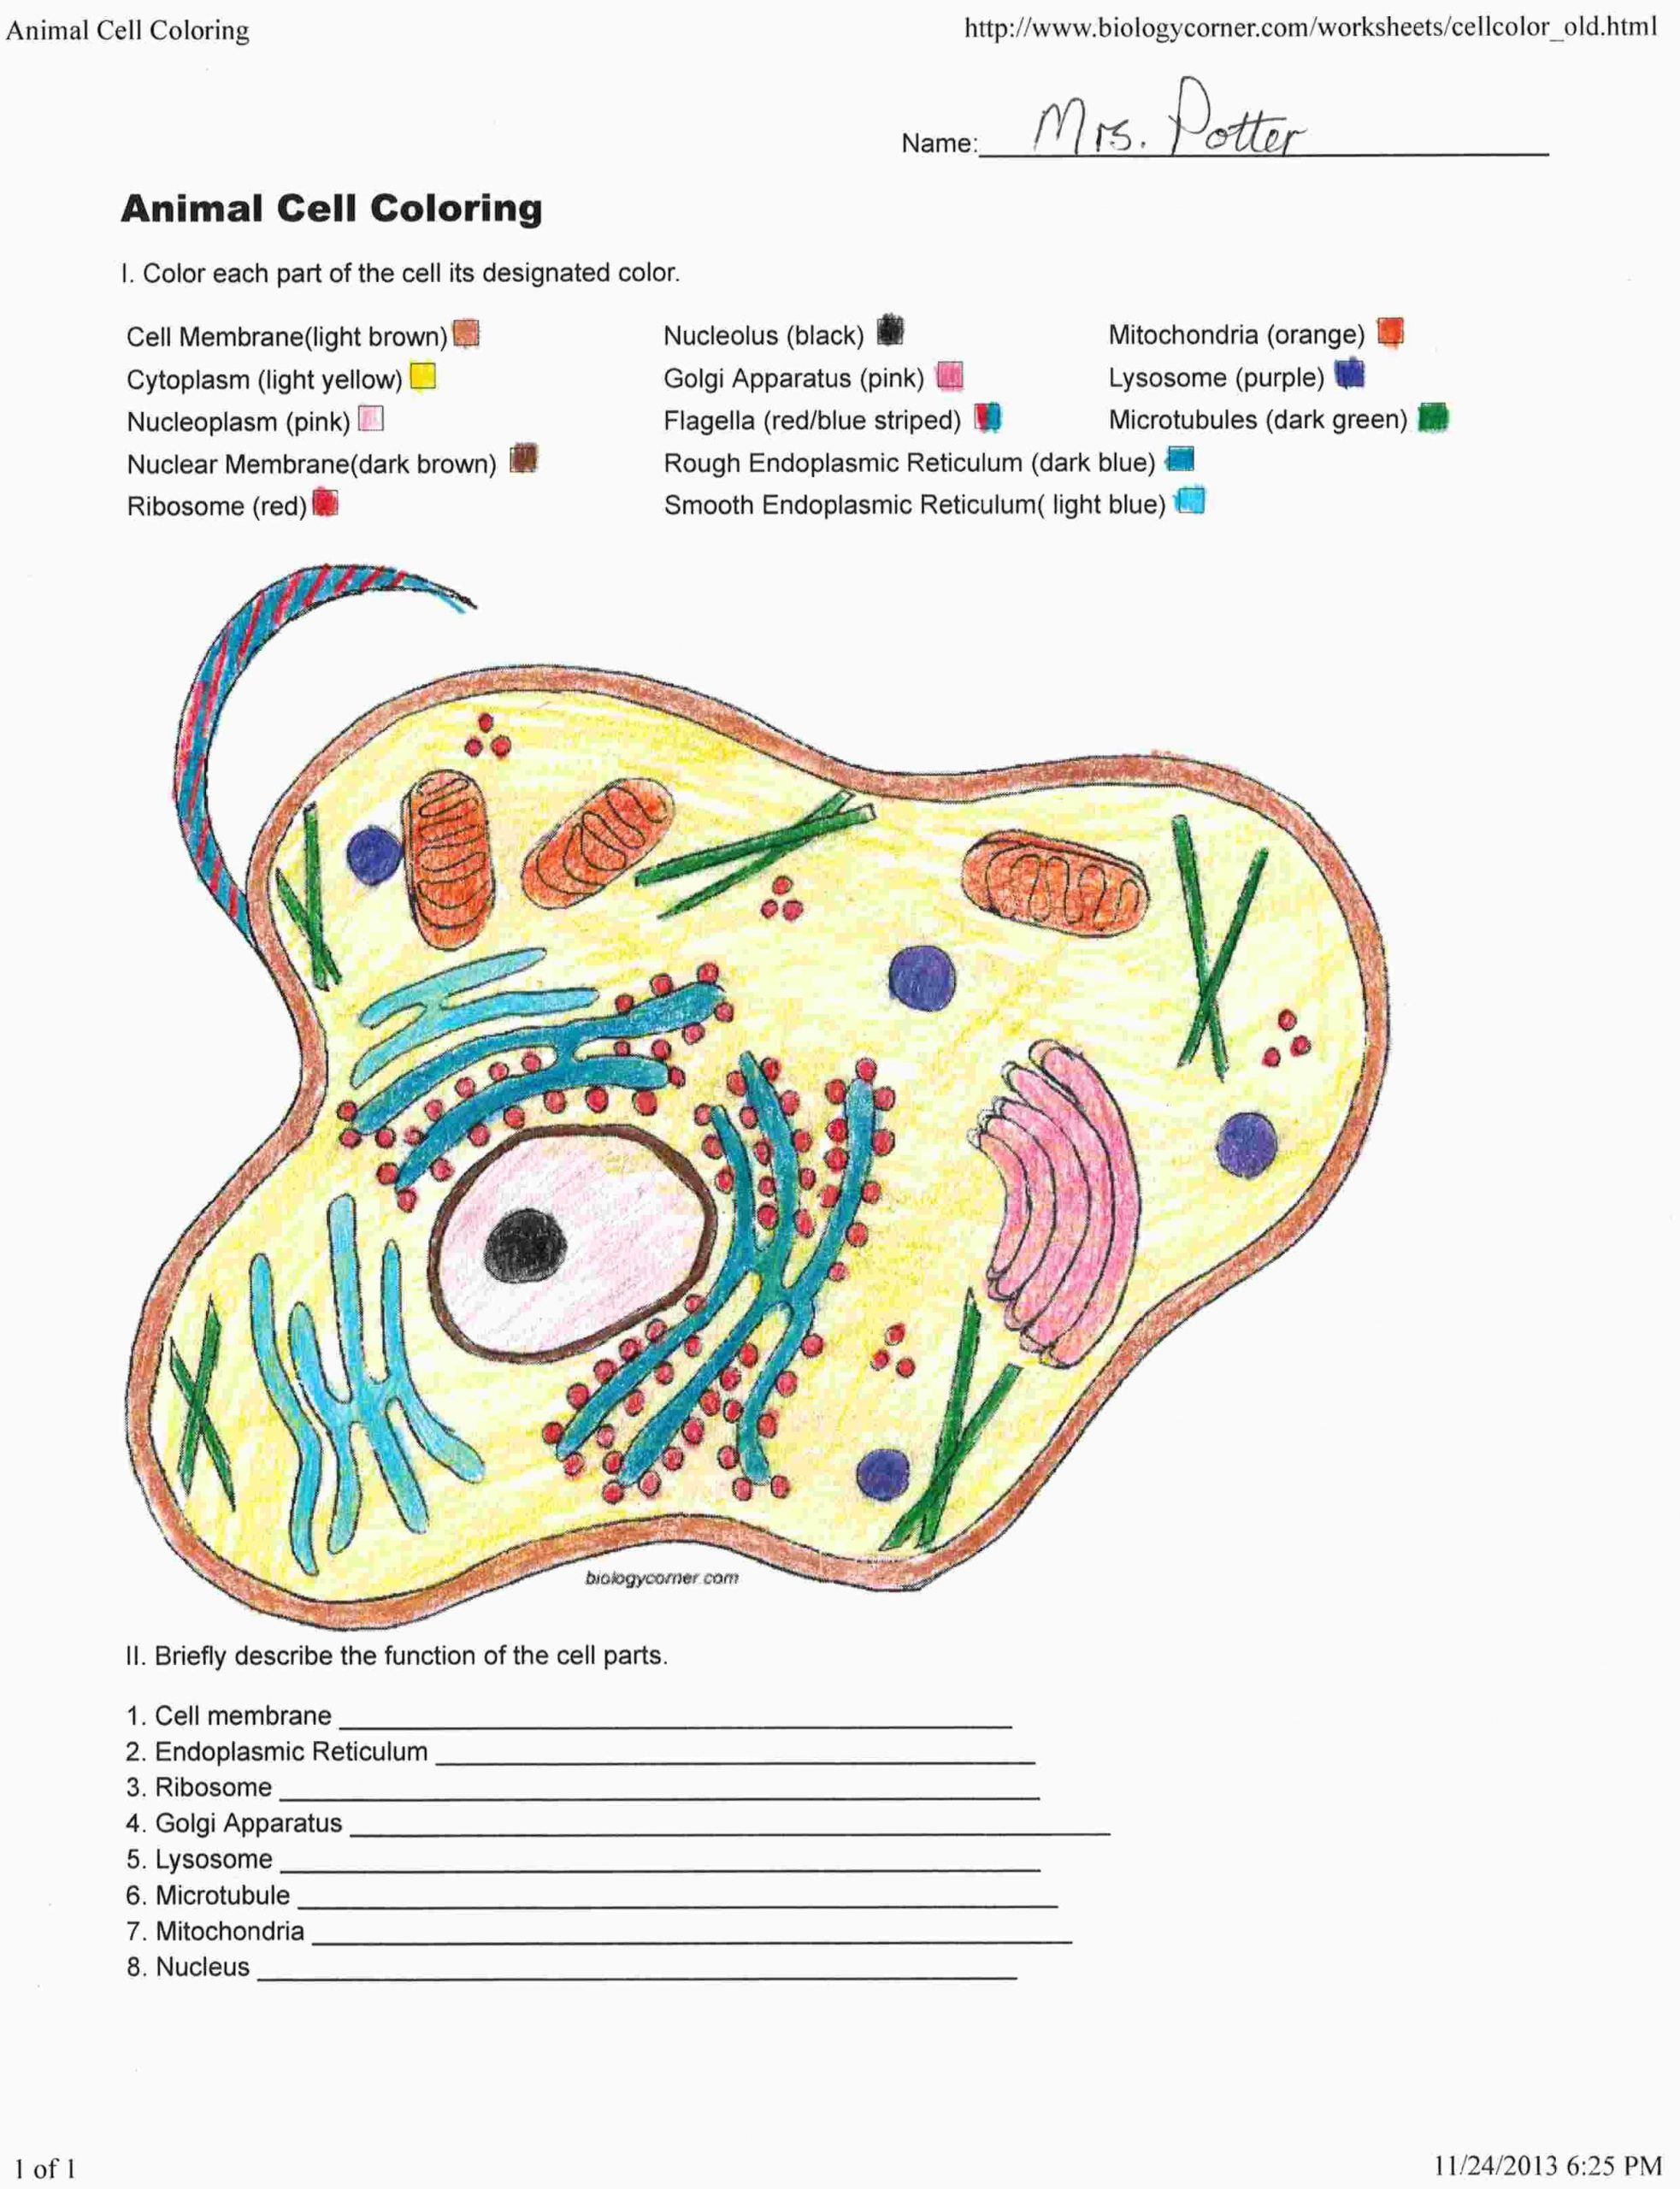 Animal Cells Coloring Worksheet Coloring Sheet Labeled Animal Cell Coloring Key